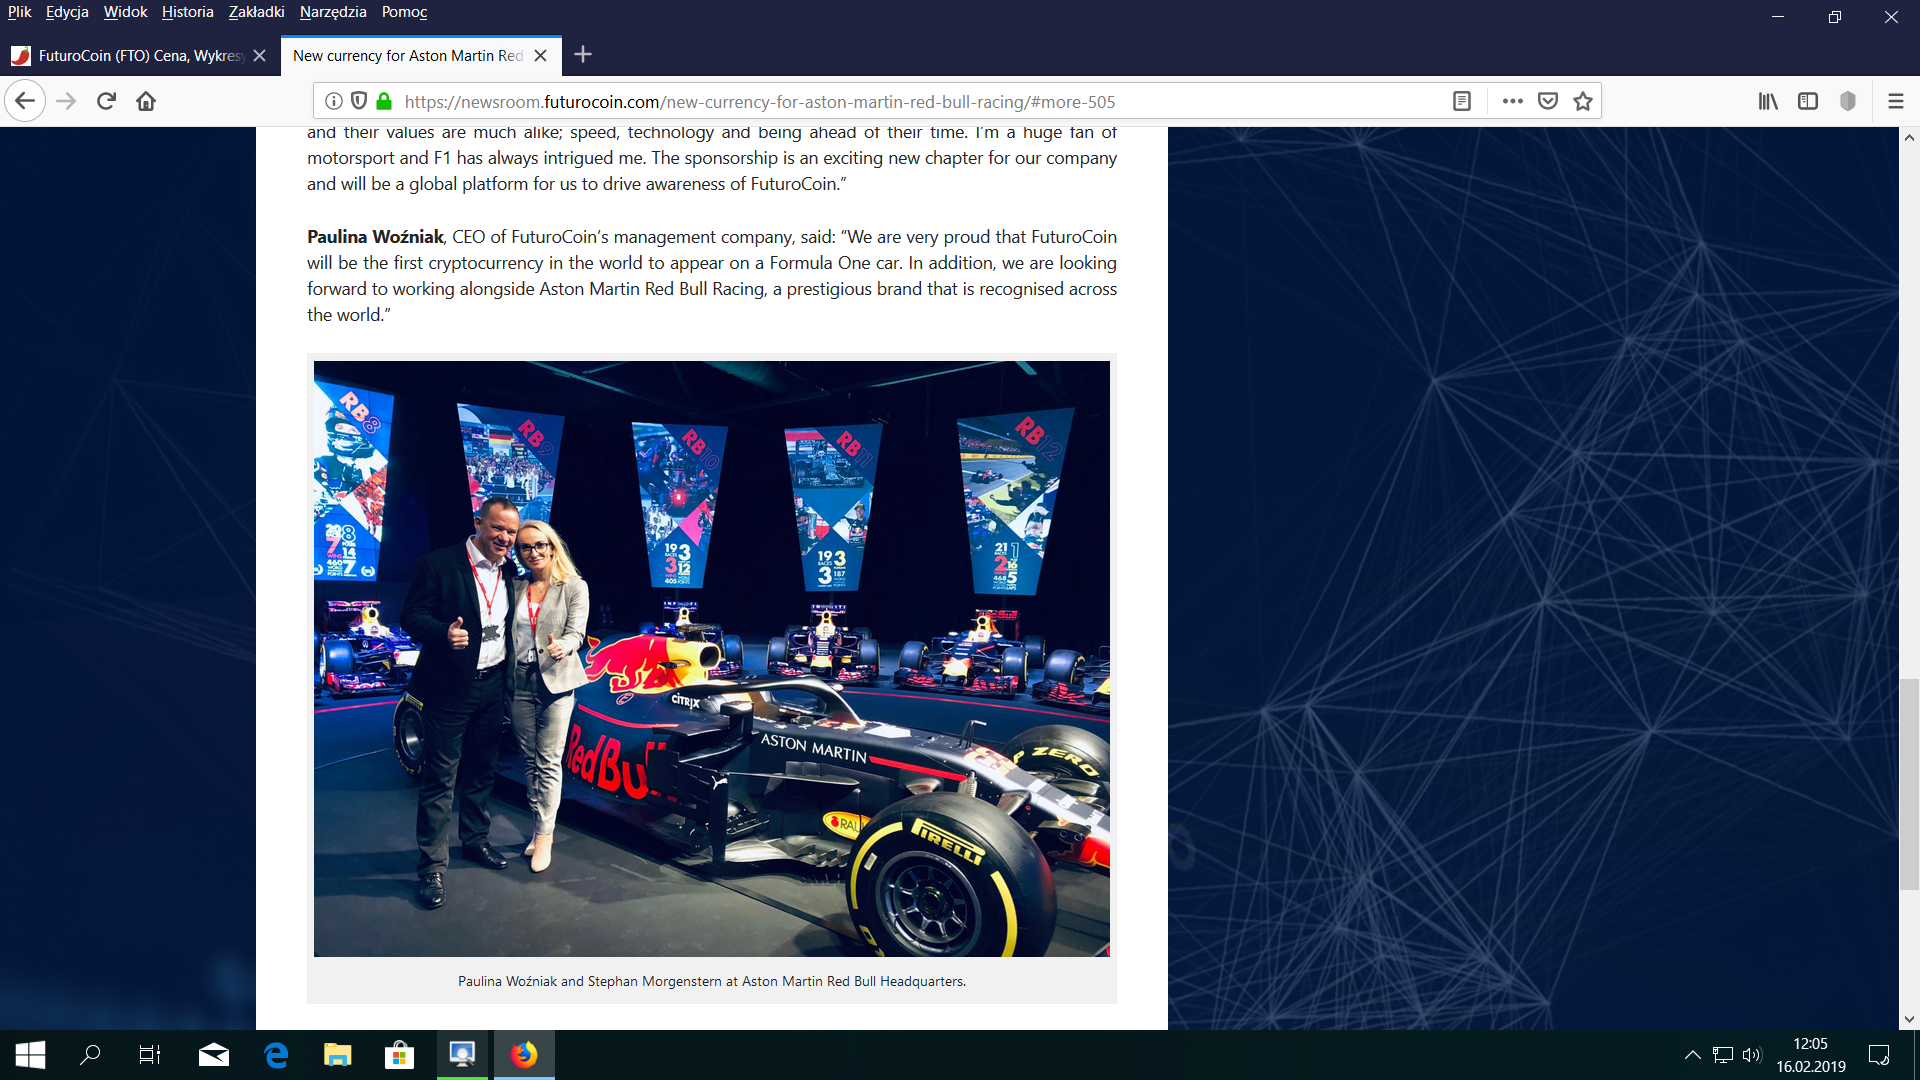 FuturoCoin unveiled as official sponsor Partner of Aston Martin Red Bull Racing  image